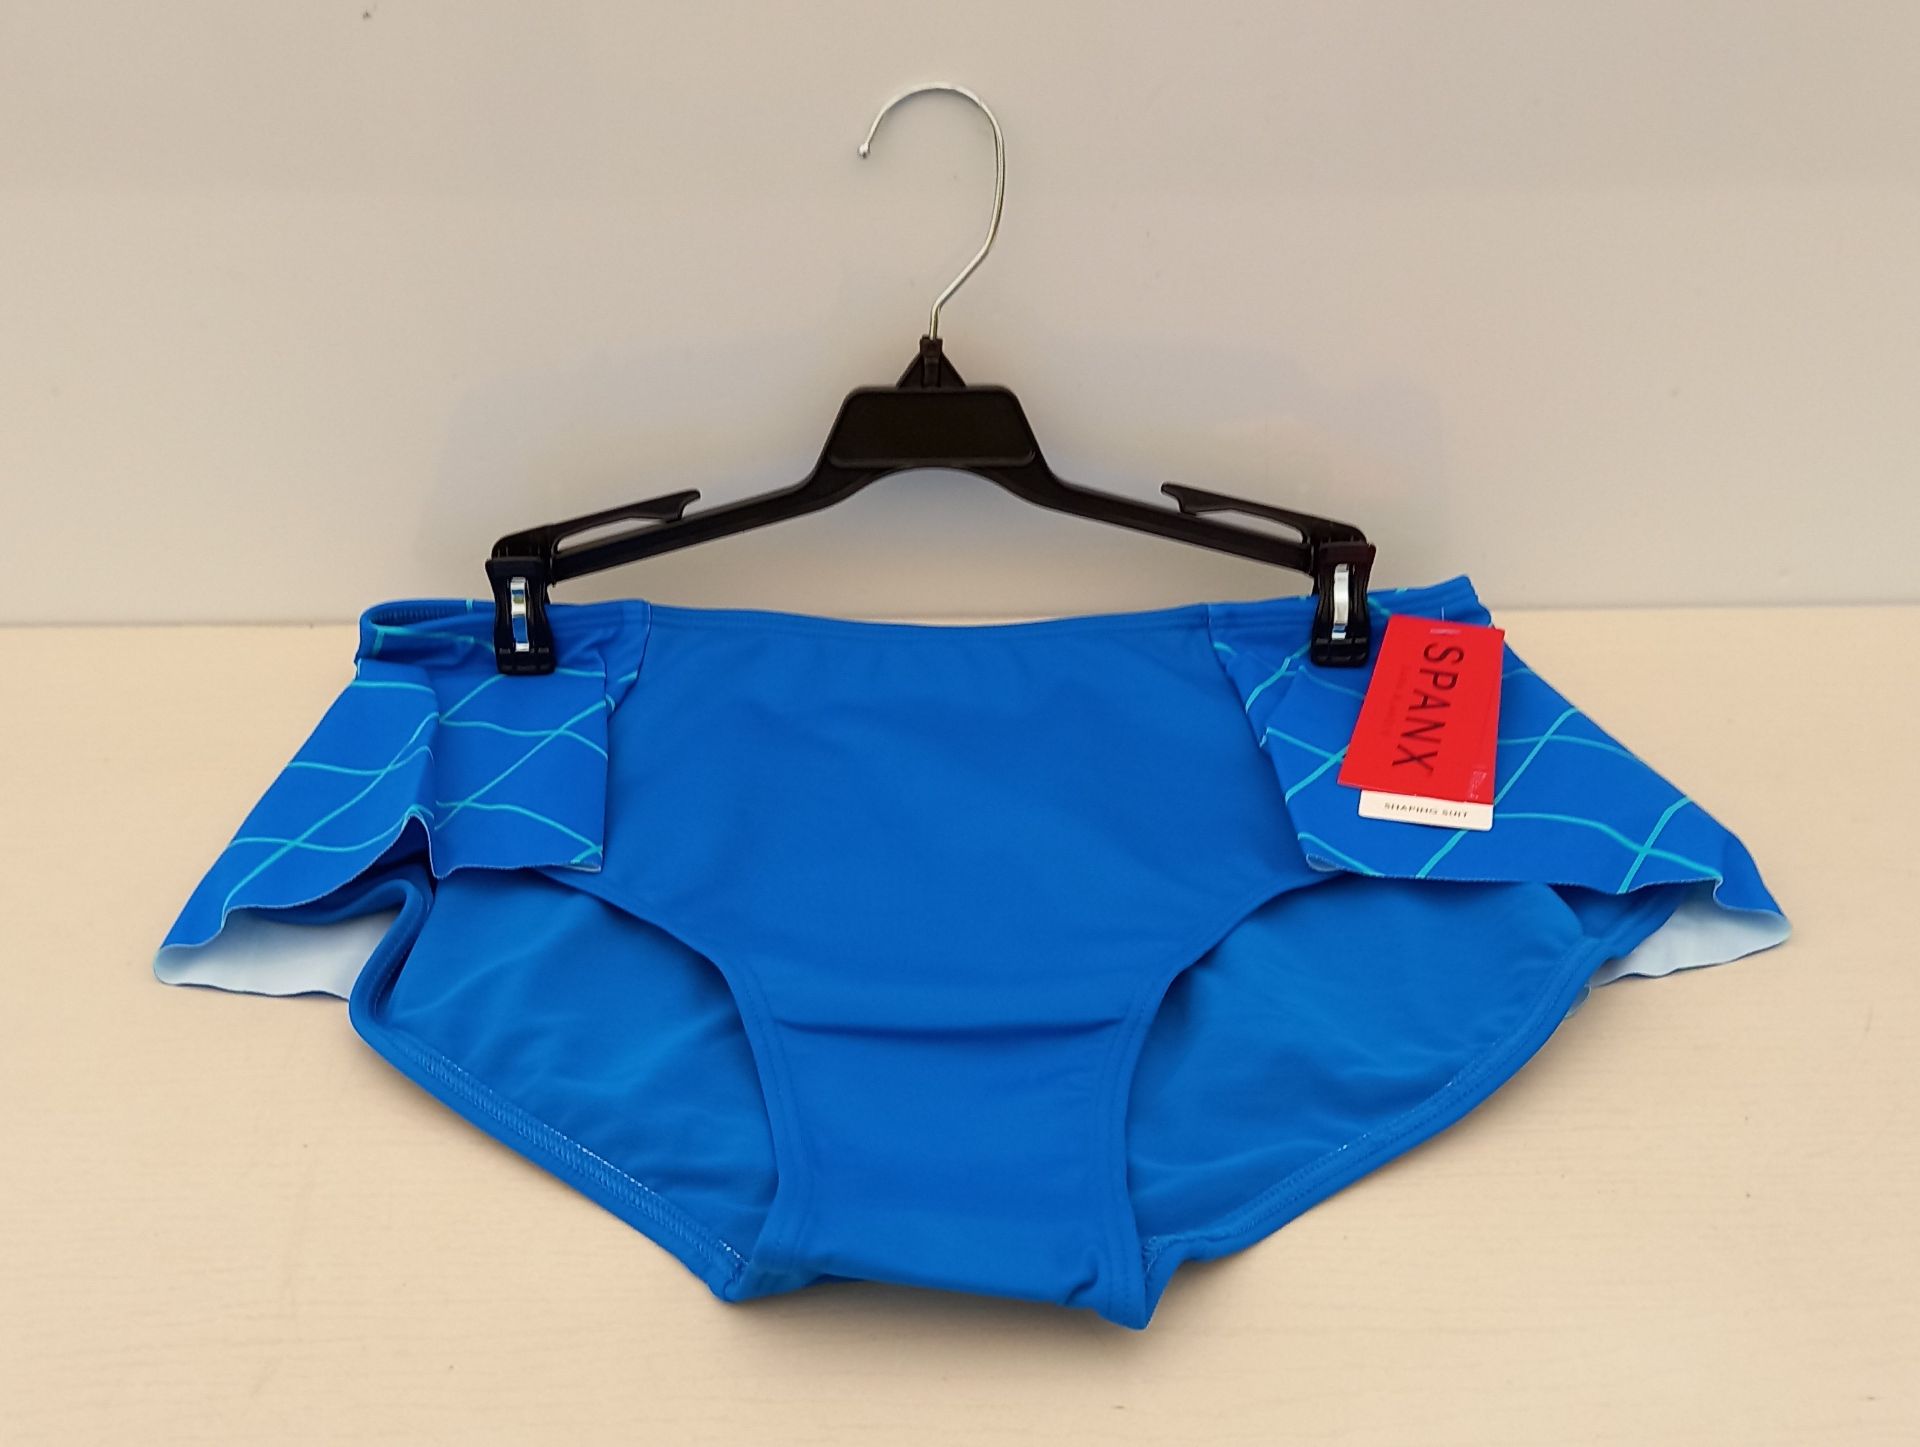 7 X BRAND NEW SPANX SWIMMING BOTTOMS IN ELECTRIC BLUE SIZE 10 RRP $78.00 (TOTAL RRP $546.00)